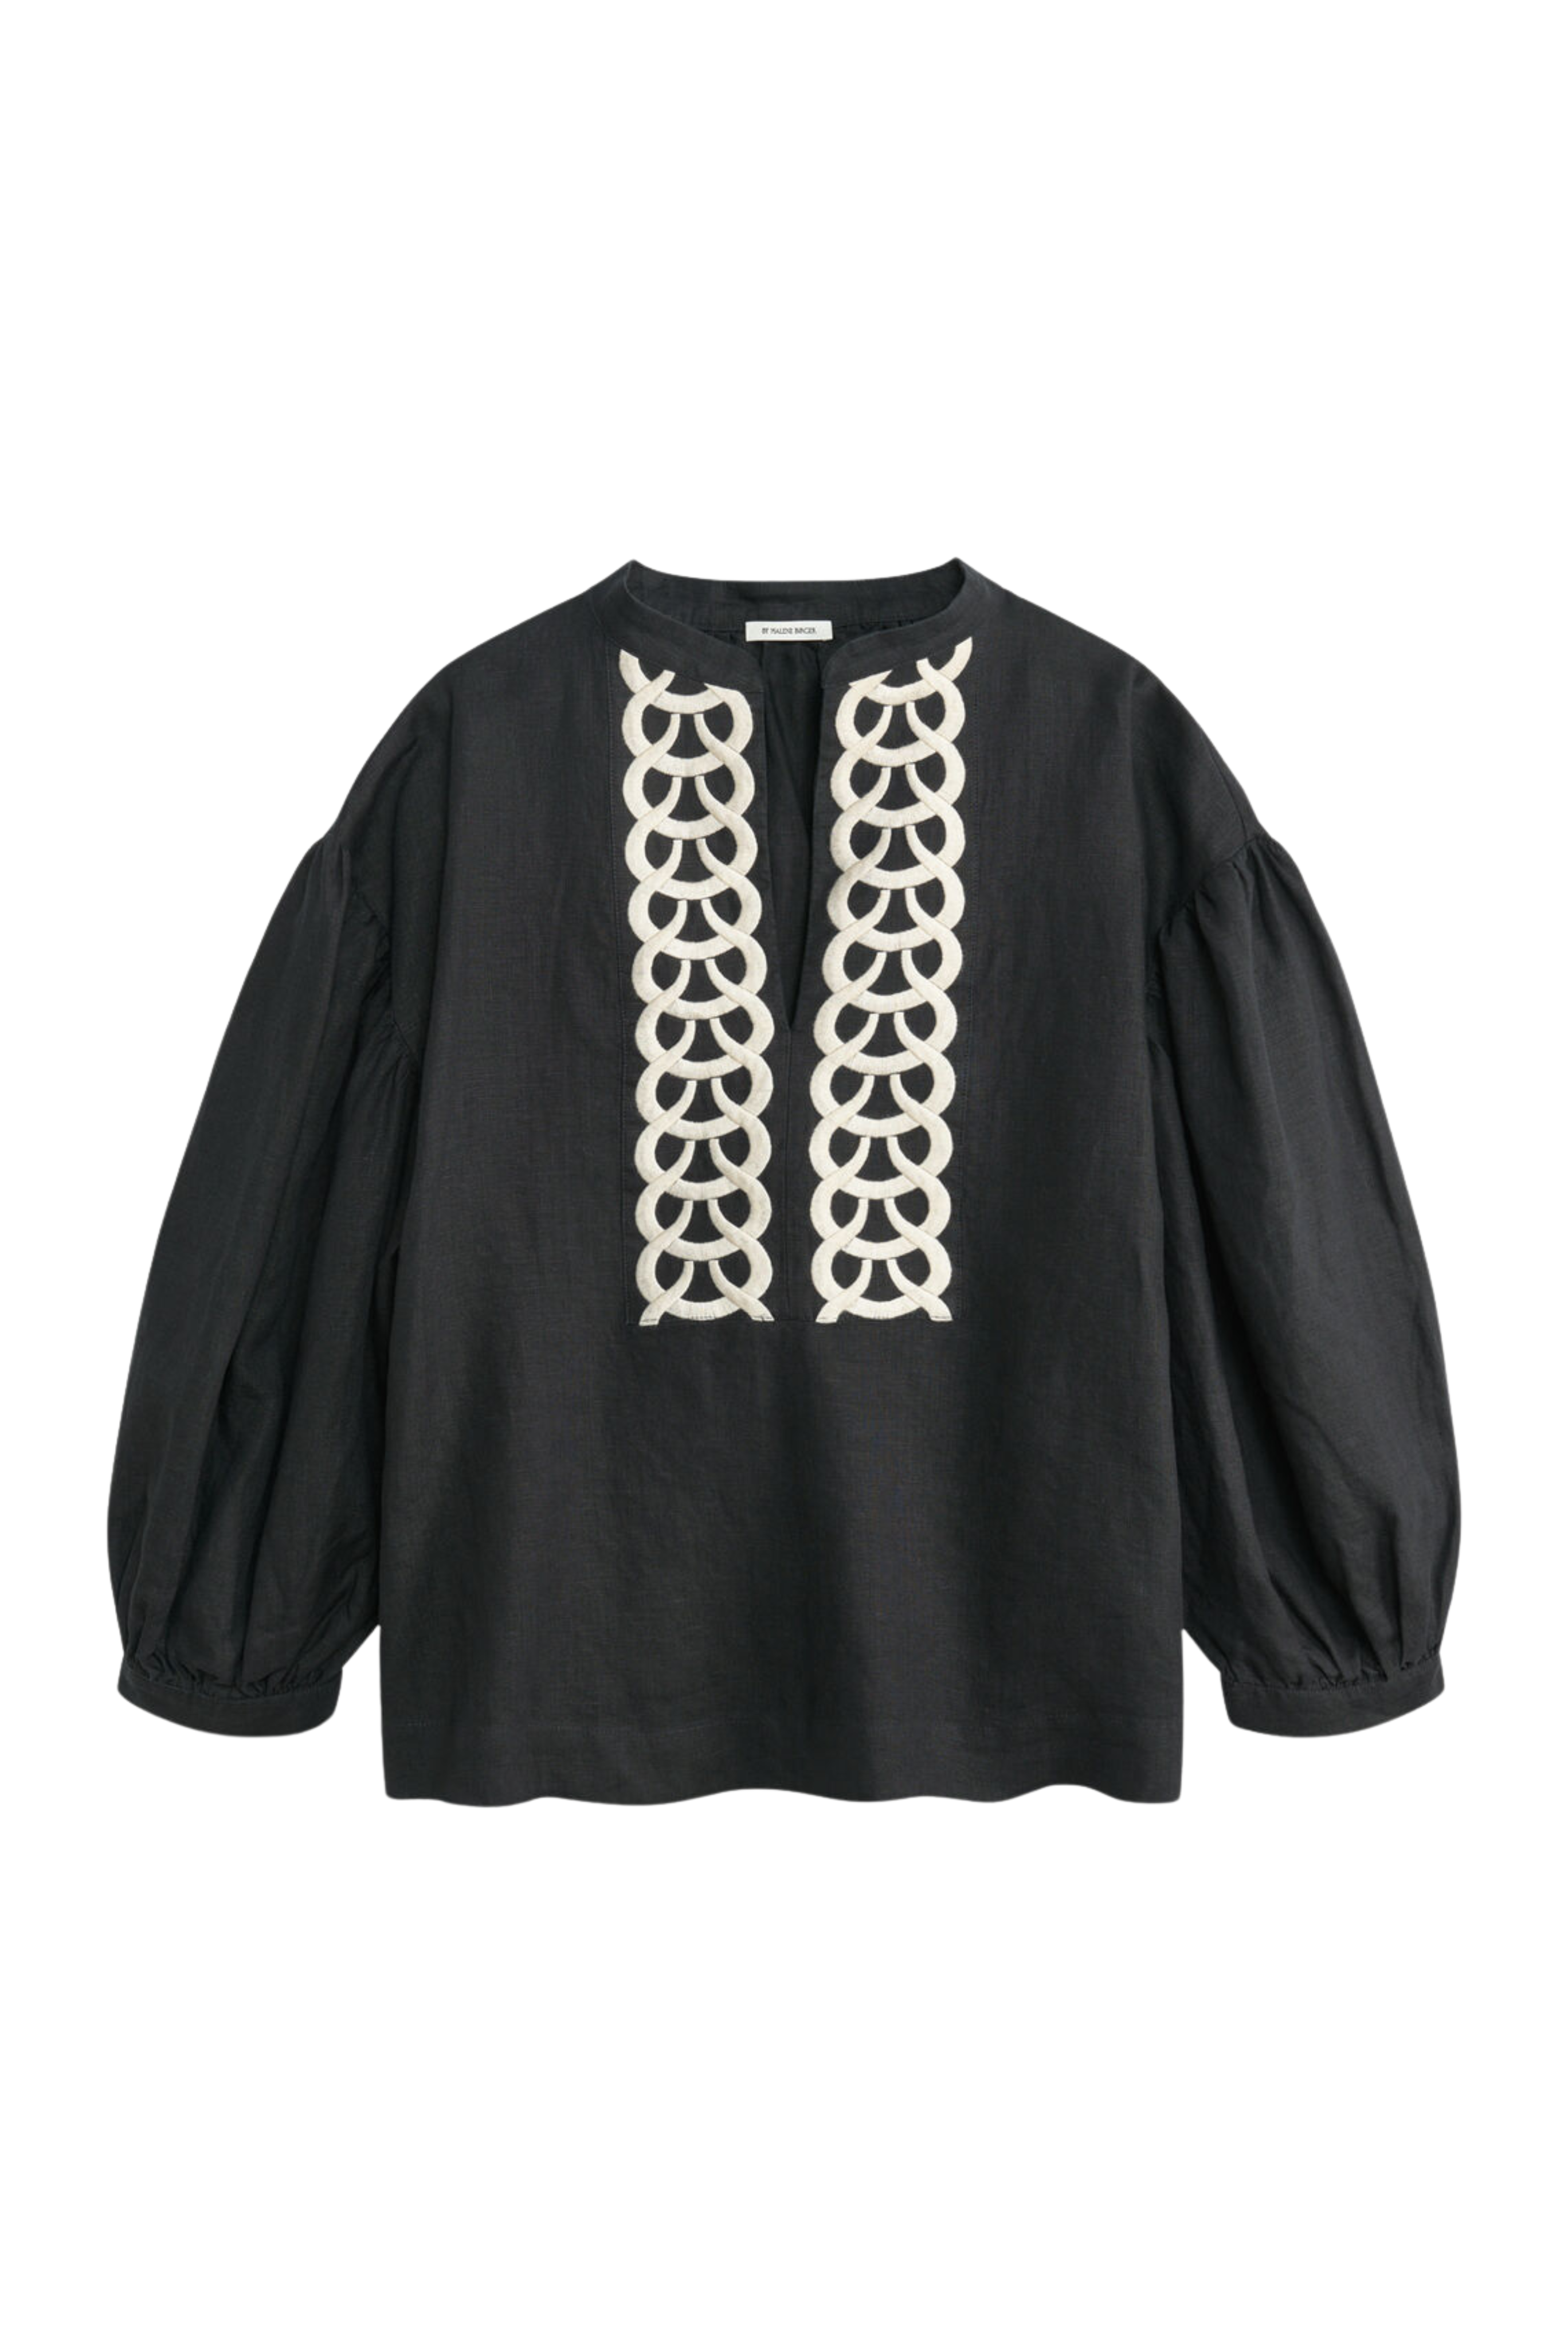 BY MALENE BIRGER Cadmus Embroidered Top